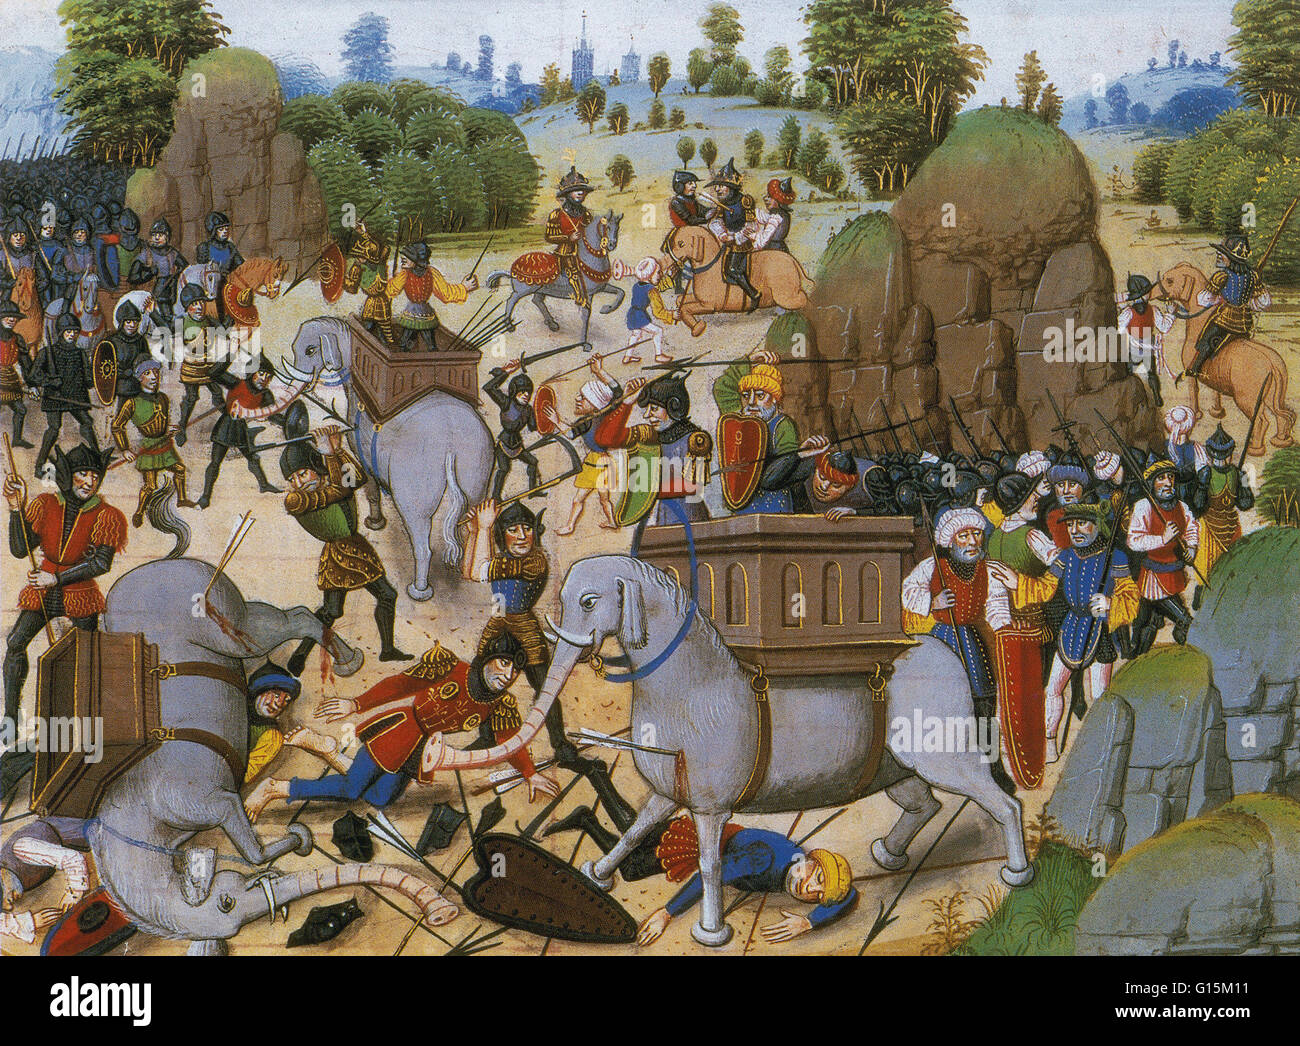 Image taken from, Story of Alexander the Great, 14th century. The battle  scene in India is illustrated in the style of the Middle Ages. Alexander  III of Macedon (356-323 BC), commonly known